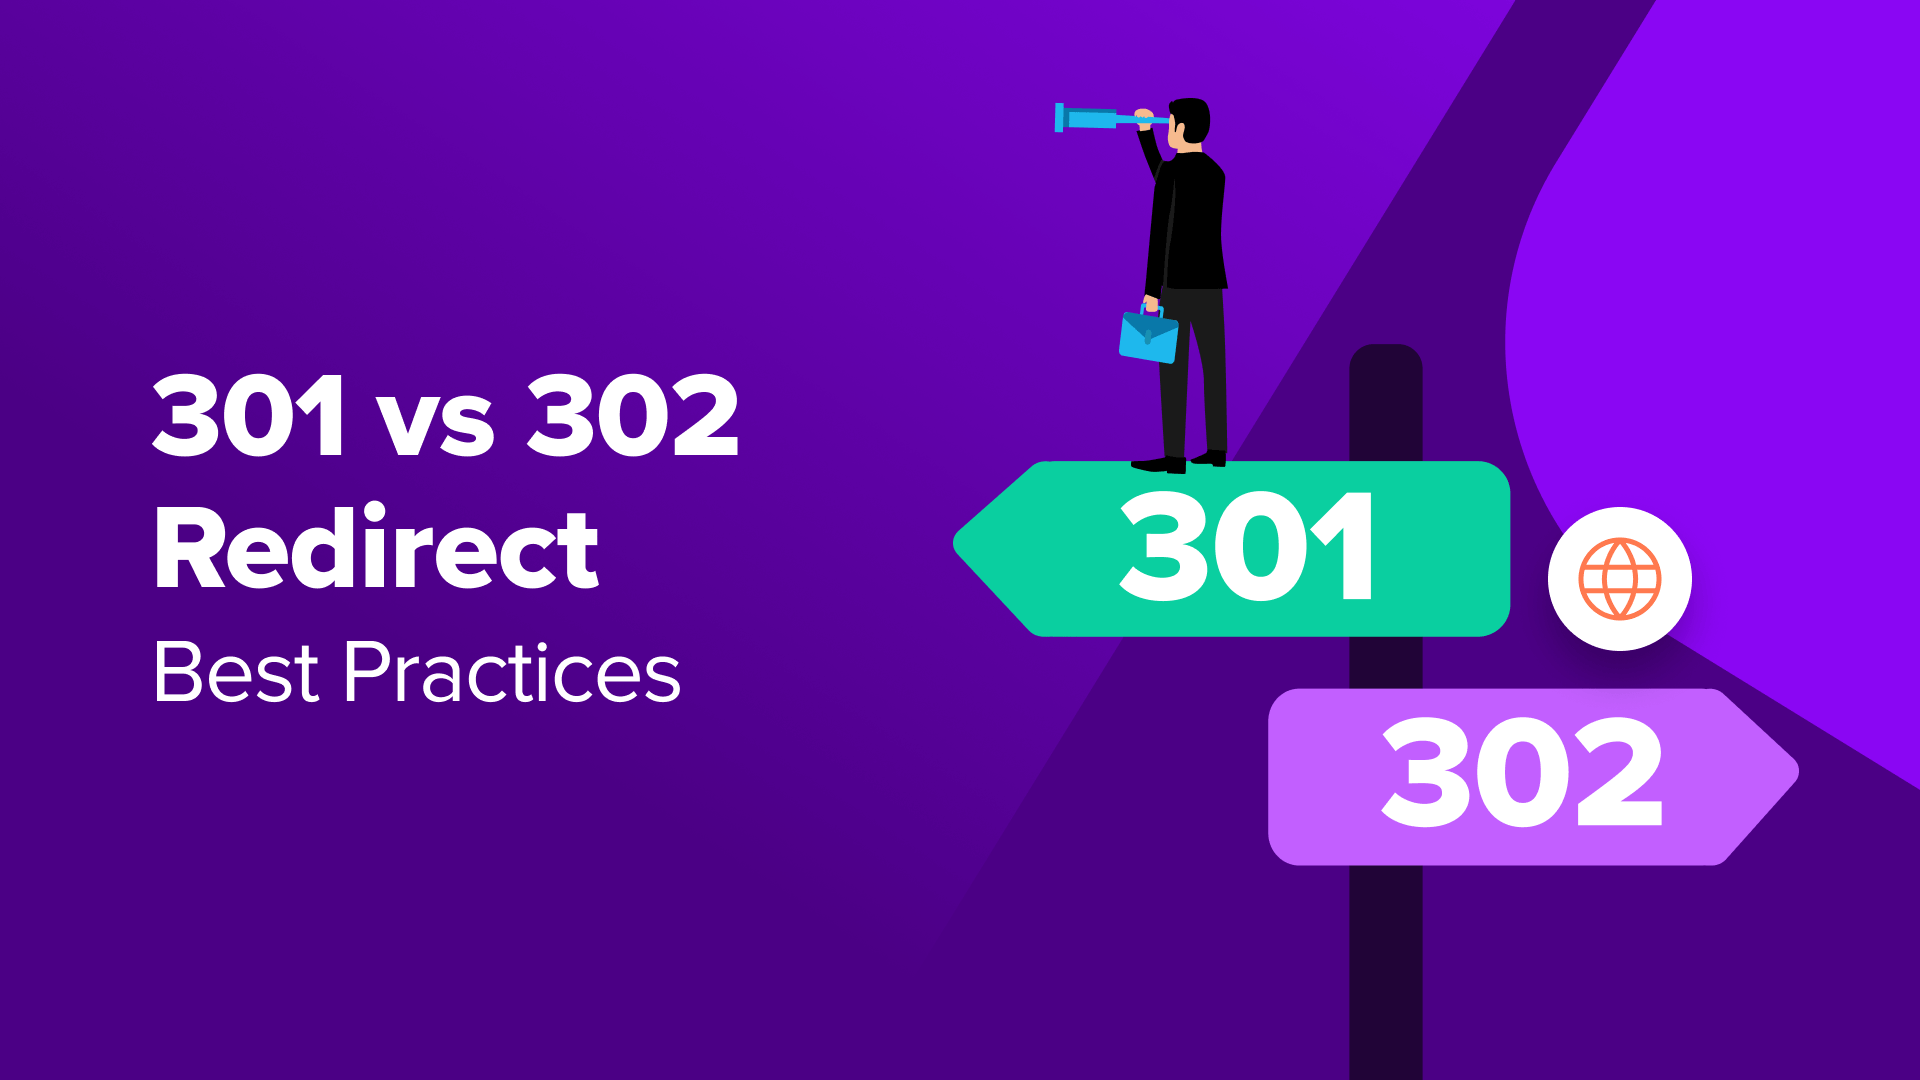 302-redirect-vs-301-redirect-–-best-practices-(explained)